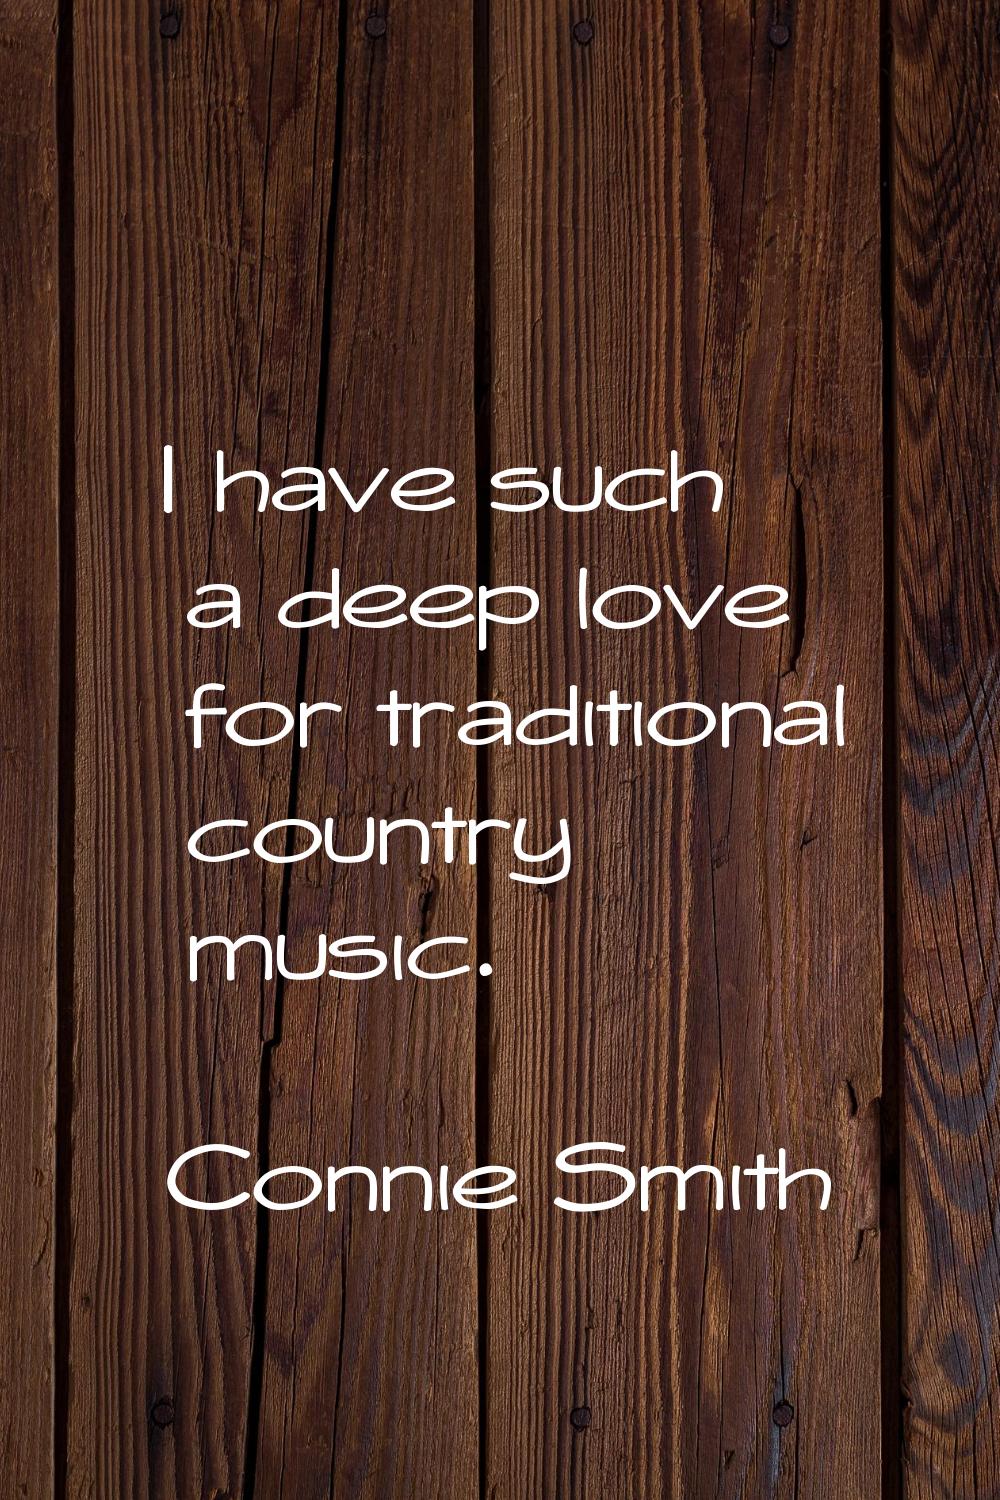 I have such a deep love for traditional country music.